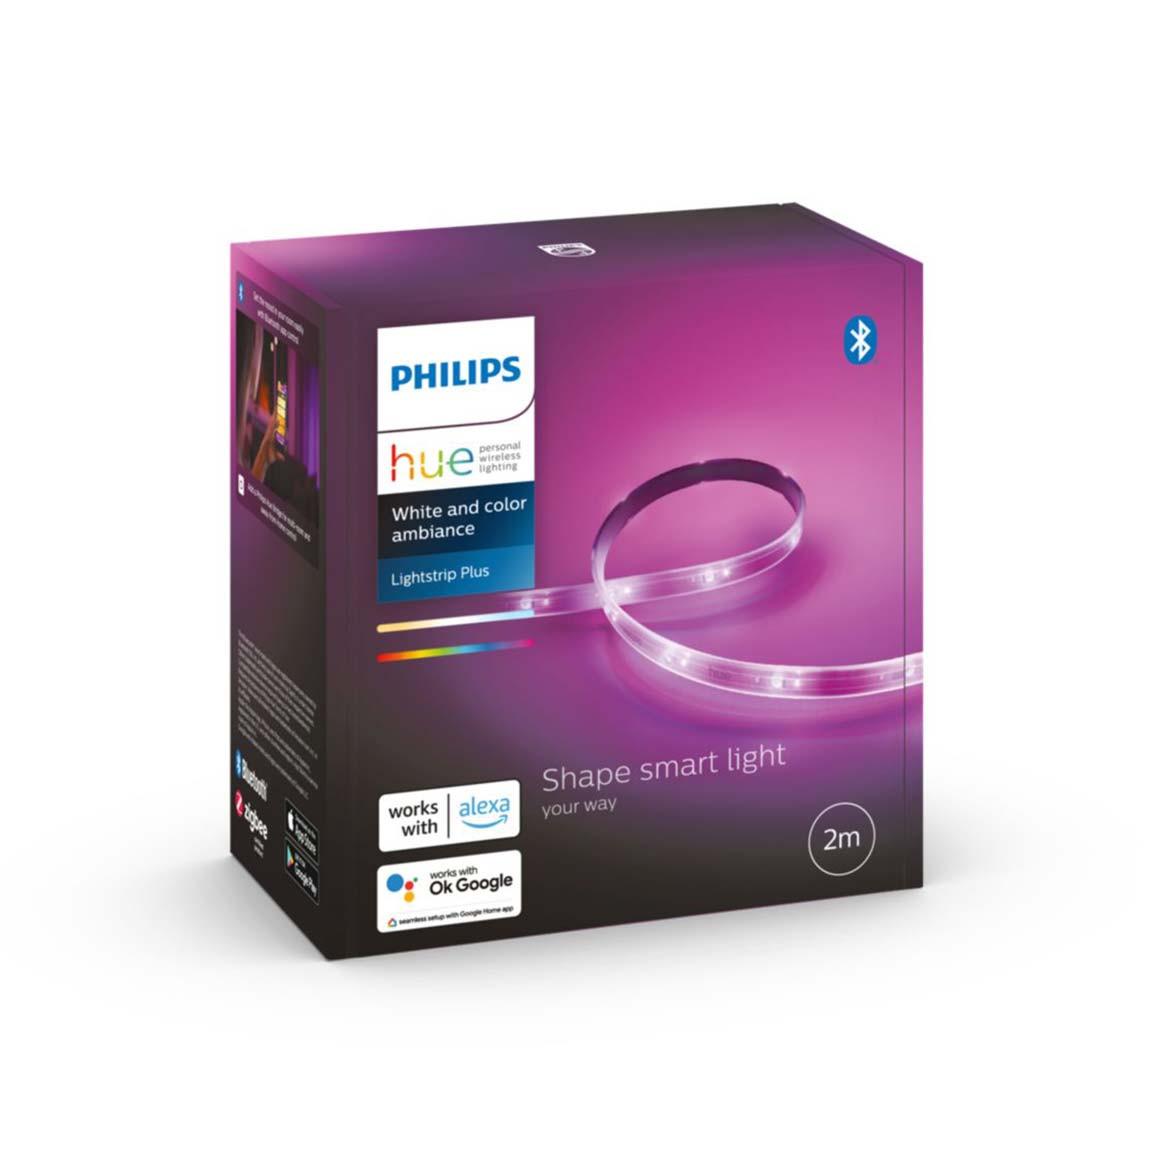 Philips Hue White and Color Ambiance Lightstrip Plus Basis Verpackung